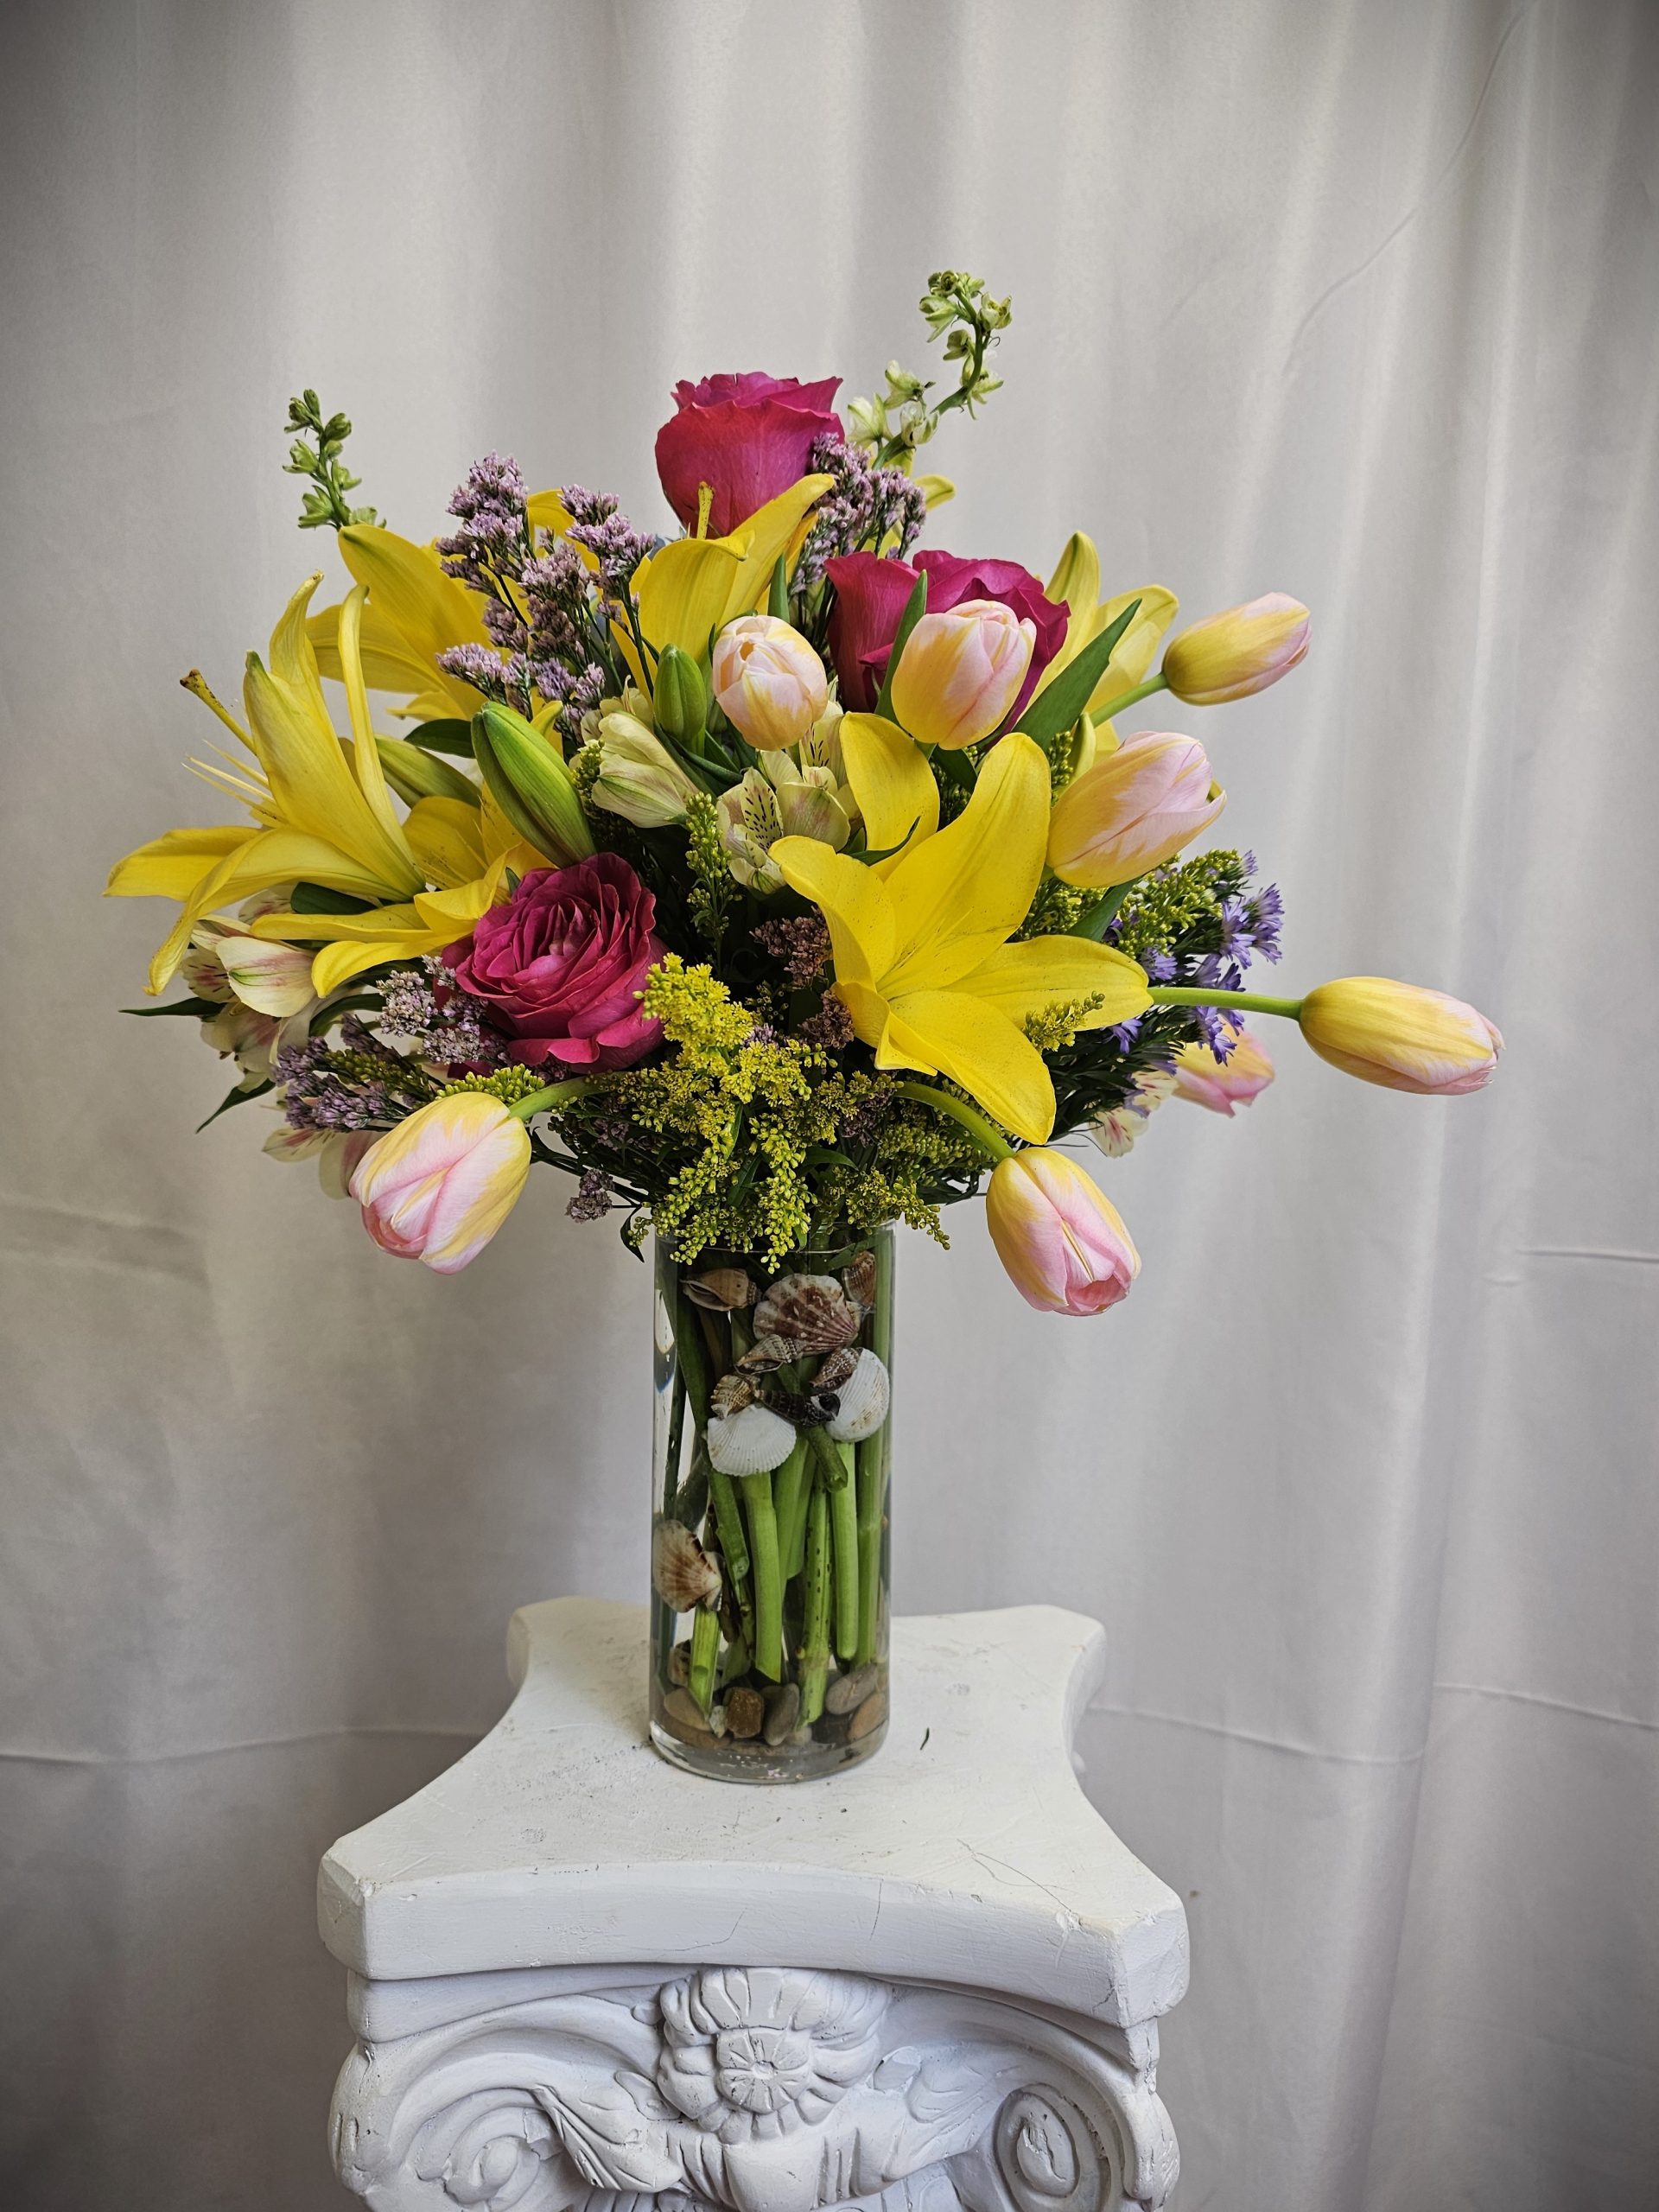 A vibrant bouquet of Orange Tulips and Purple Iris' in a glass vase on a white pedestal.